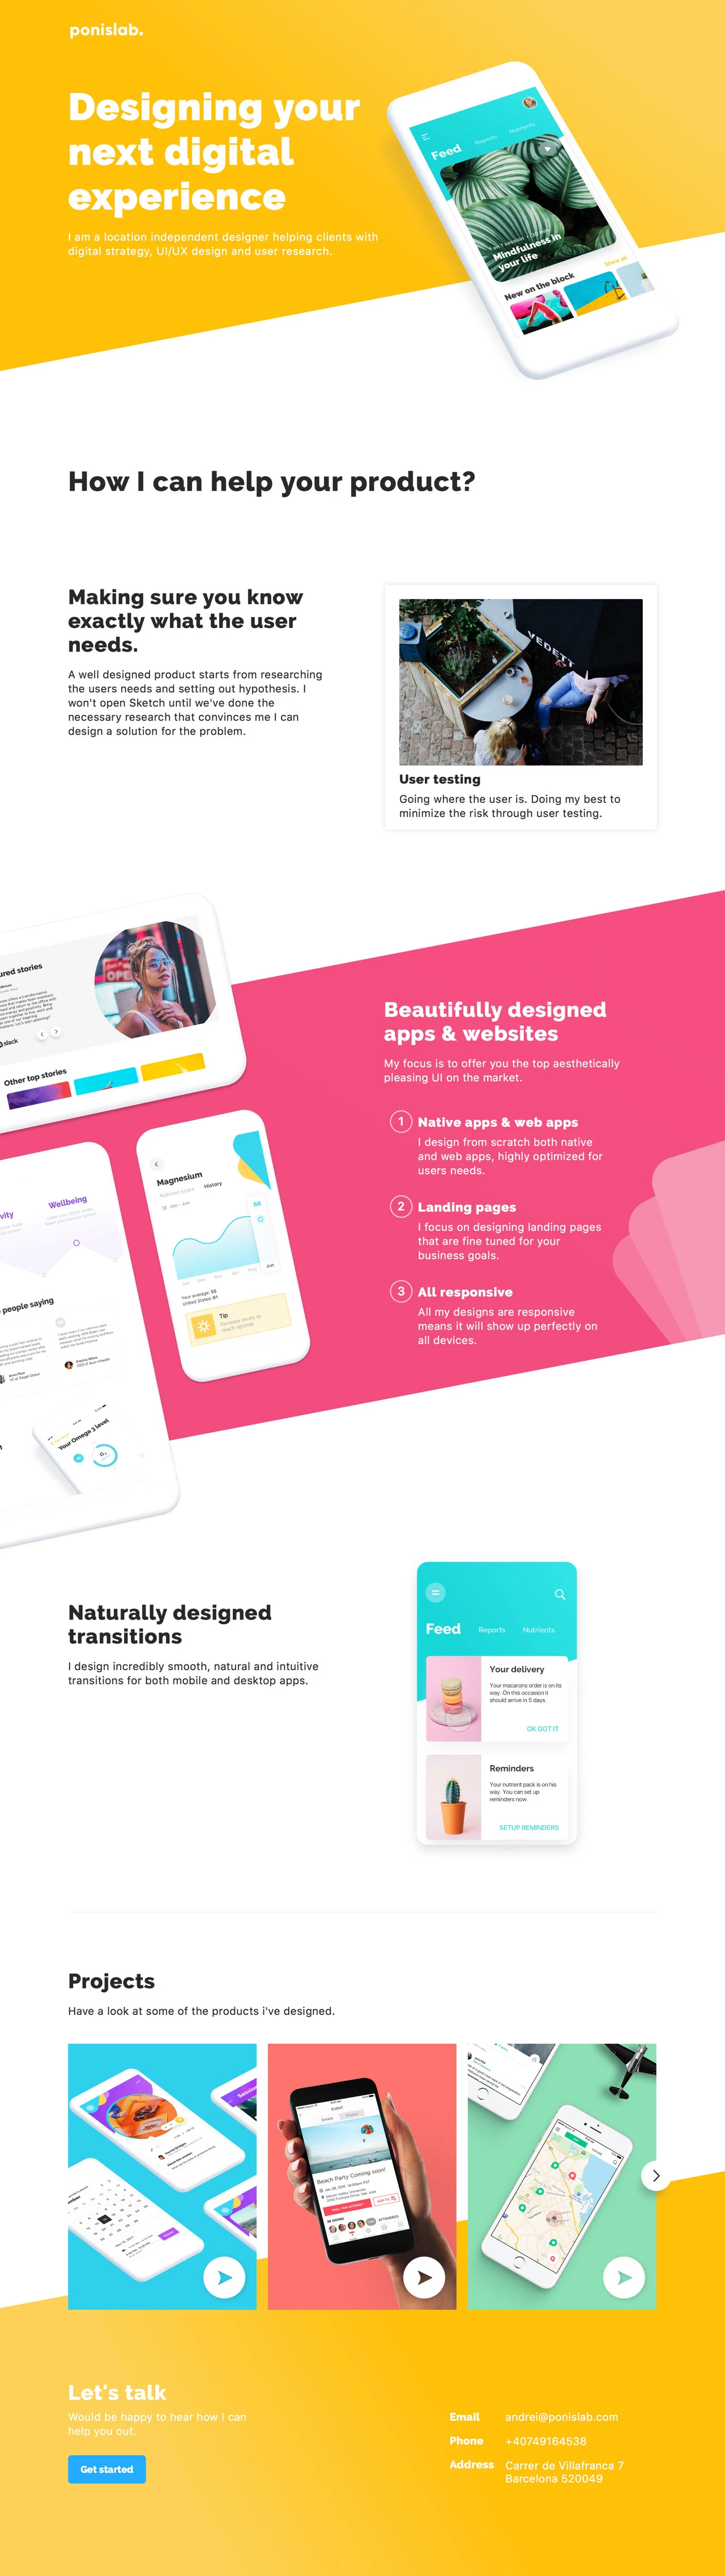 ponislab Landing Page Example: I am a location independent designer helping clients with digital strategy, UI/UX design and user research.